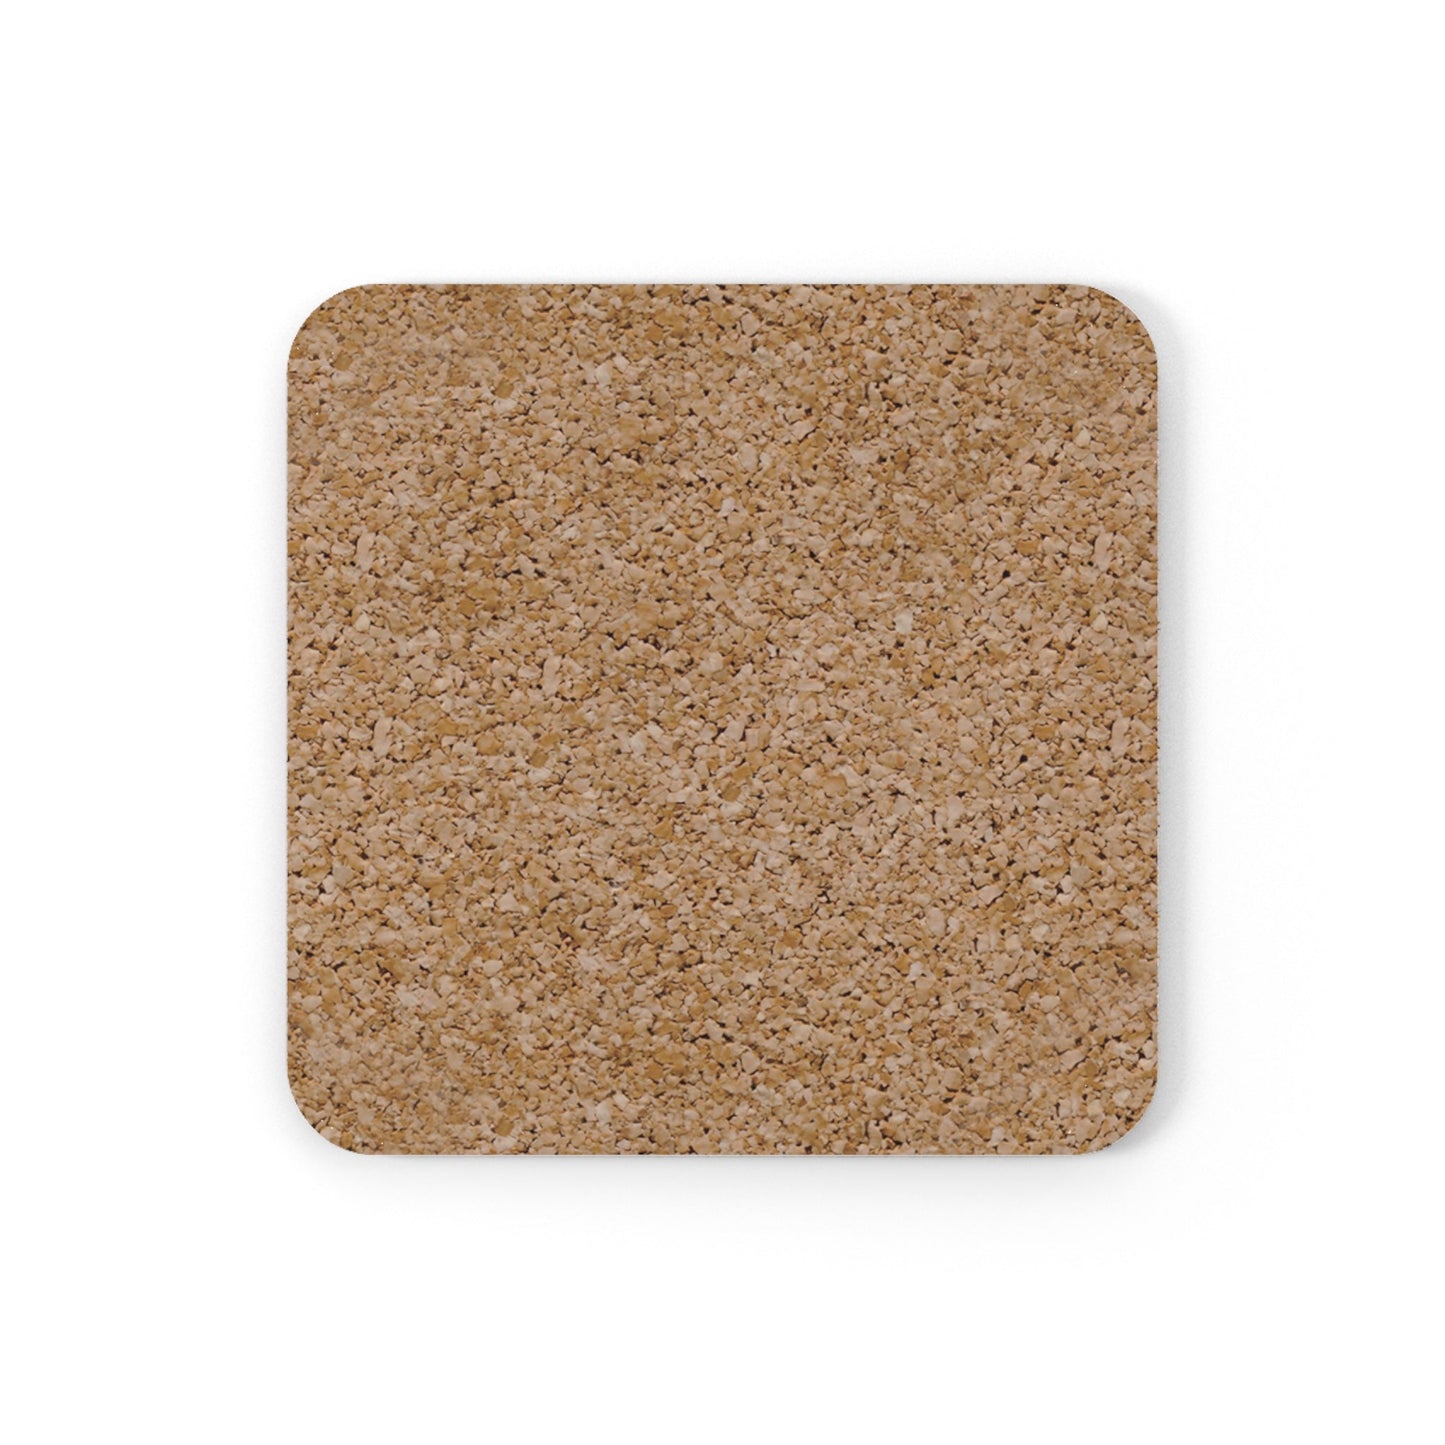 Butterfly Individual Cork Back Coasters-Round and Square - Blue Cava